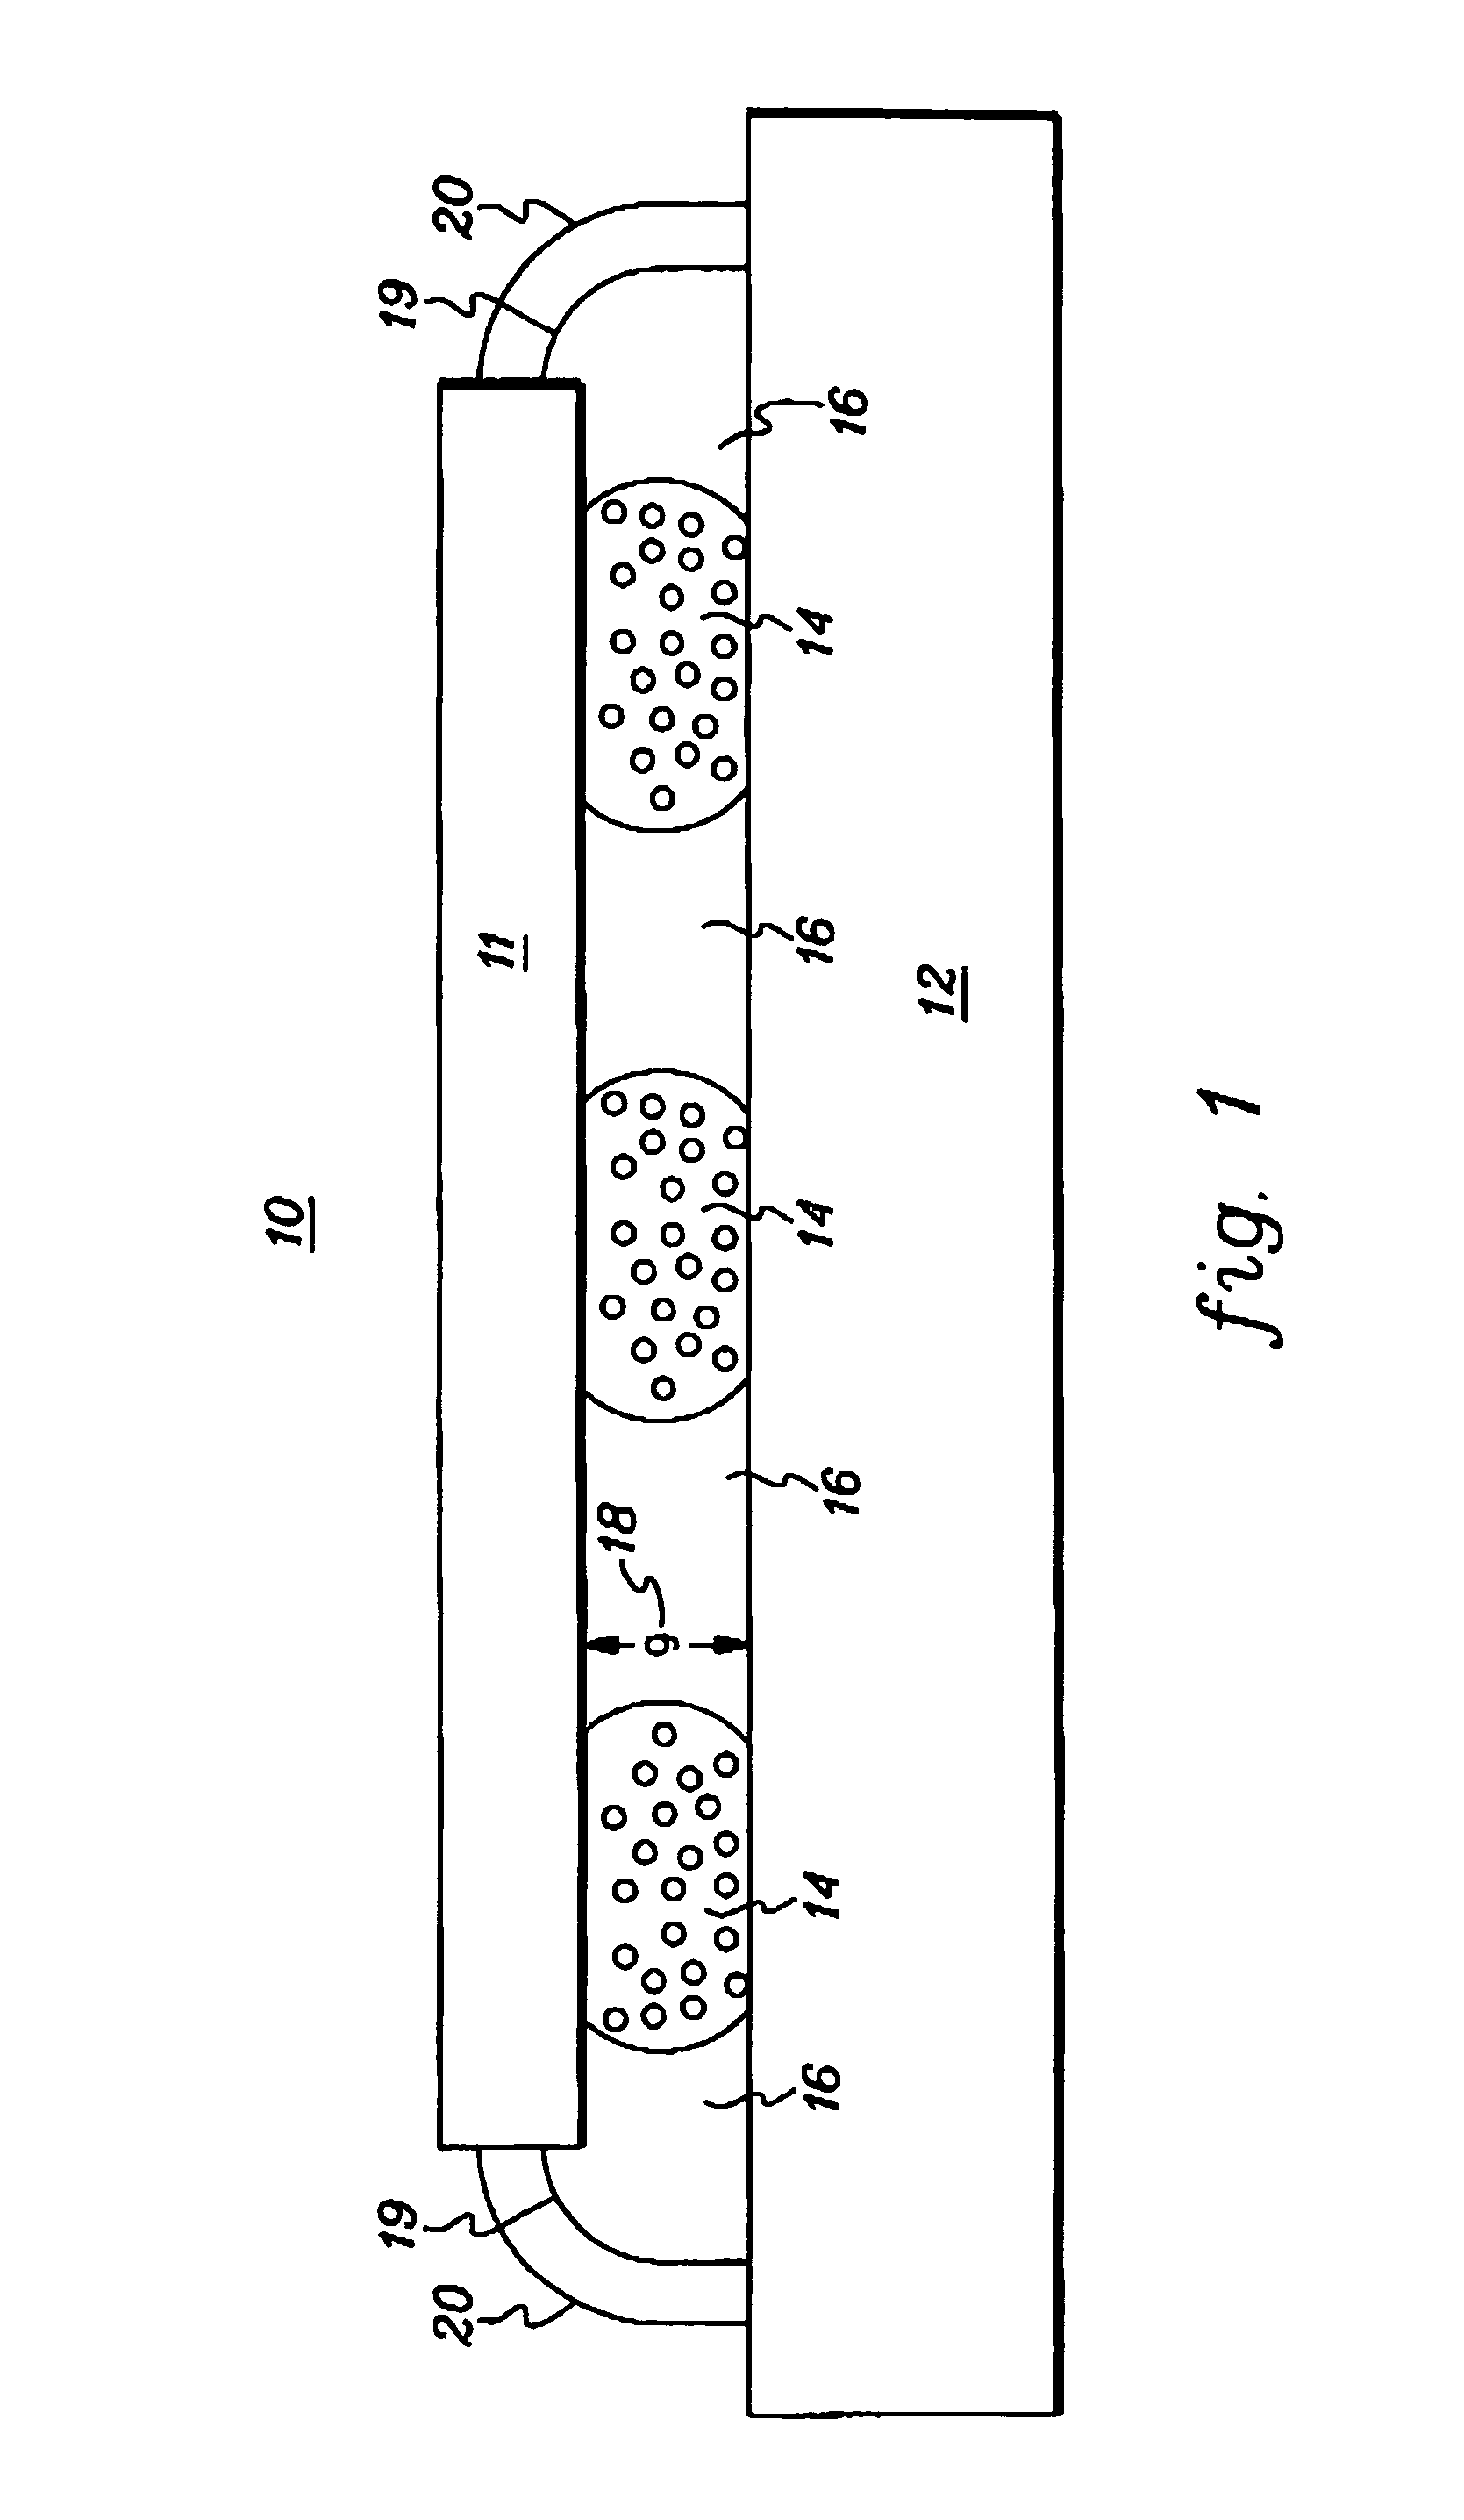 System and method for accelerated detection of transient particle induced soft error rates in integrated circuits